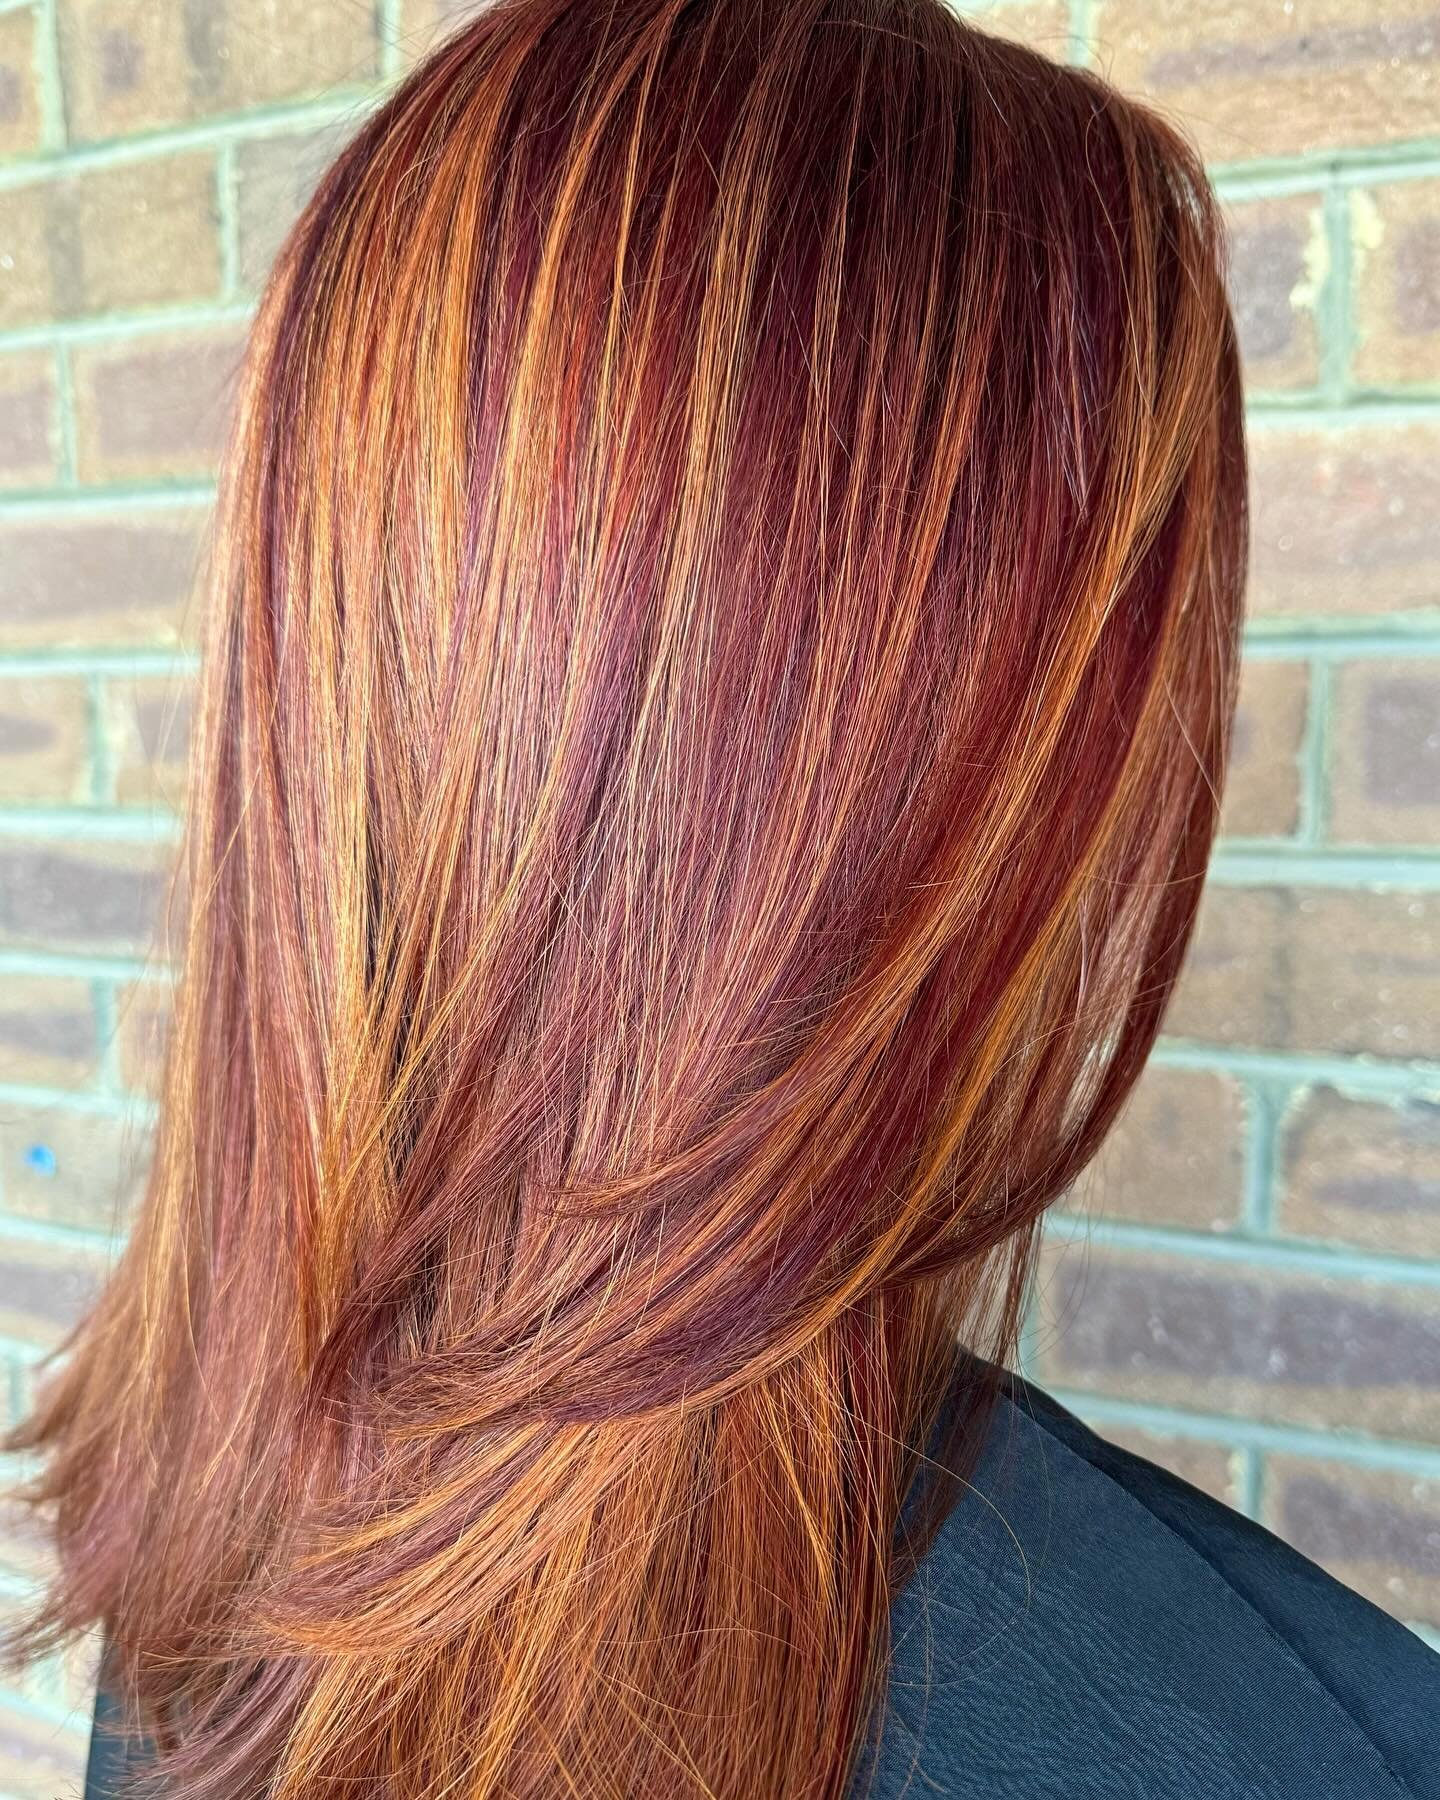 Red hair, don&rsquo;t care 🔥🔥🔥

What style represents you? Come in and tell us what you&rsquo;d like to get done! 

#dmvhairstylist #dmvhairsalon #dmvhair #behindthechair #loreal #hairinspiration #hairideas #northernvirginiahair #northernvirginiah